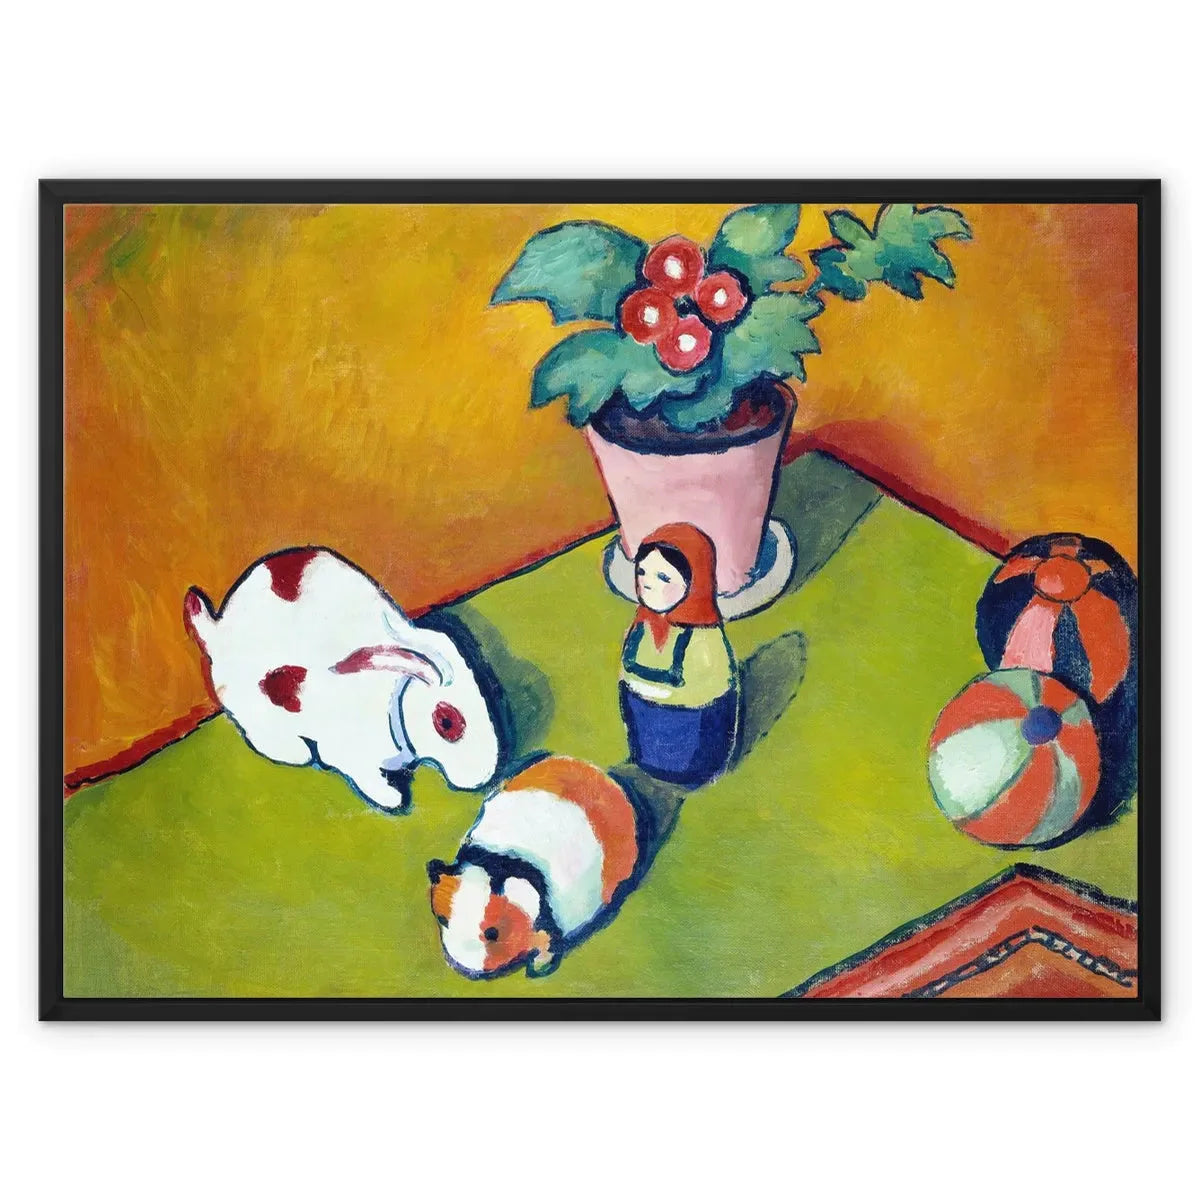 Little Walter’s Toys By August Macke Framed Canvas - 32’x24’ / Black Frame / White Wrap - Posters Prints & Visual